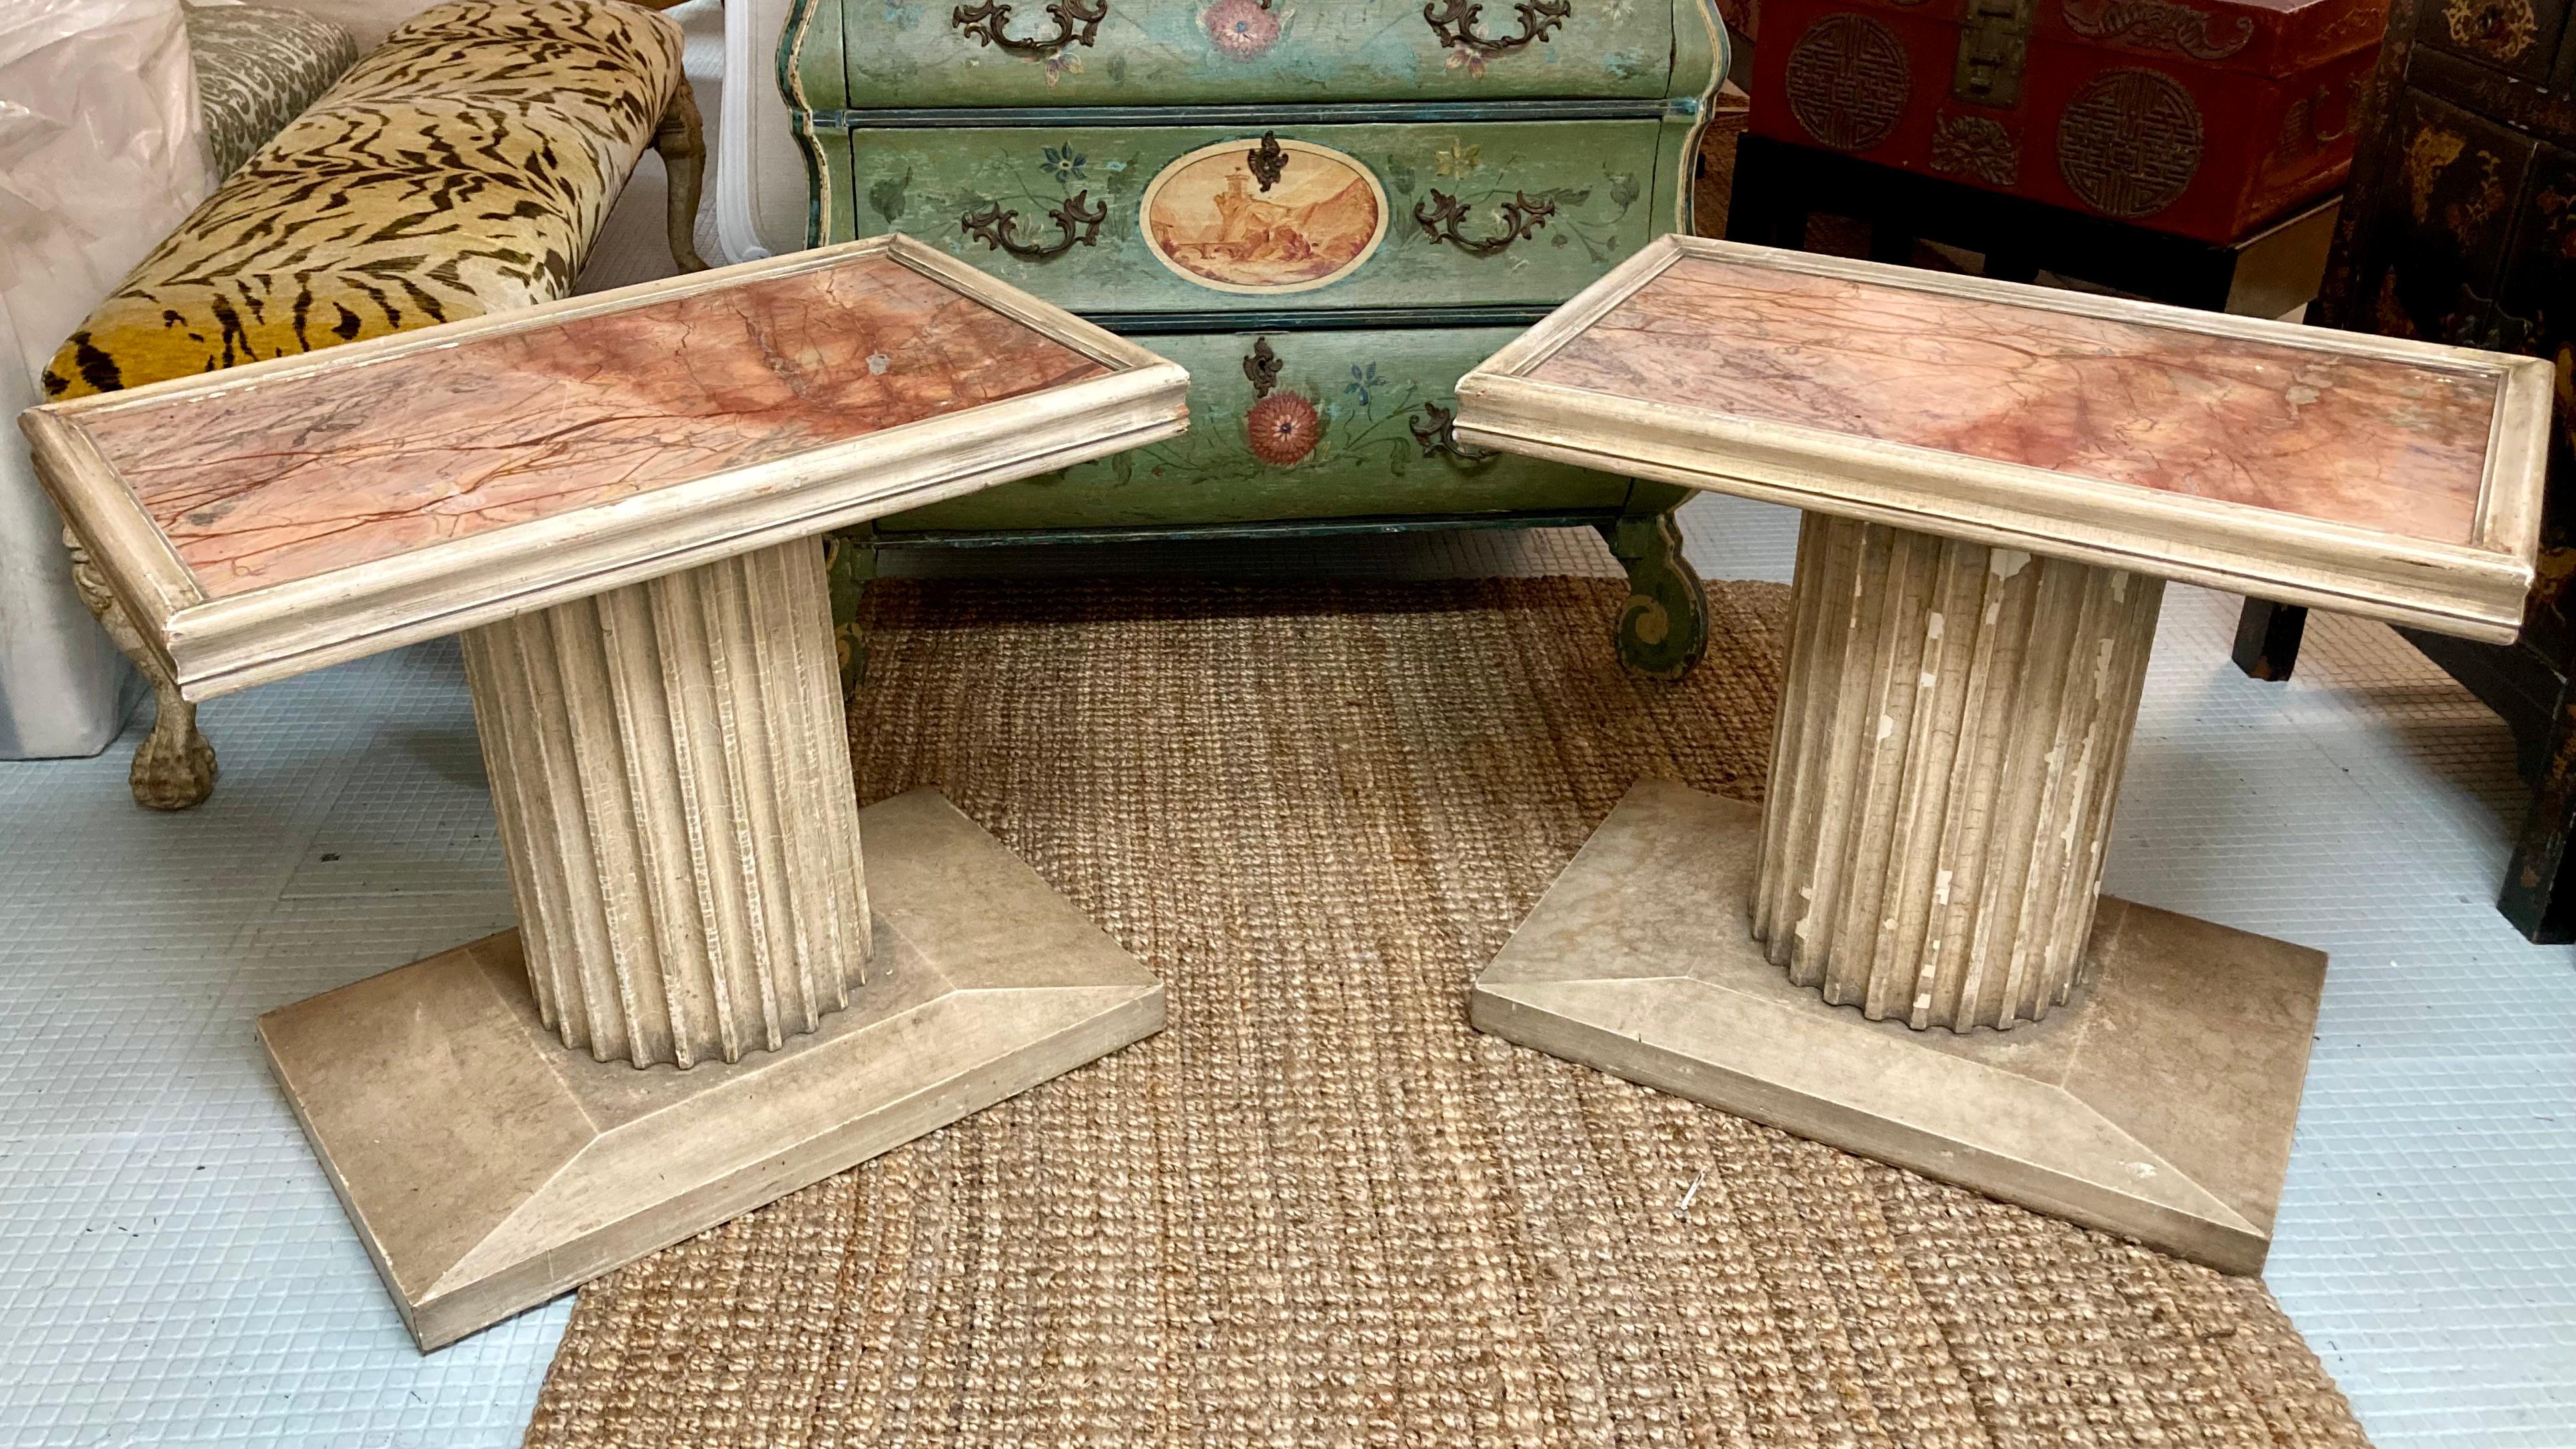 Beautiful pair of Jansen side tables with marble inset tops. The finish is original showing some age that adds to the character. The stylish Neoclassical architectural for is well balanced and gorgeous. Add some French style to your home.